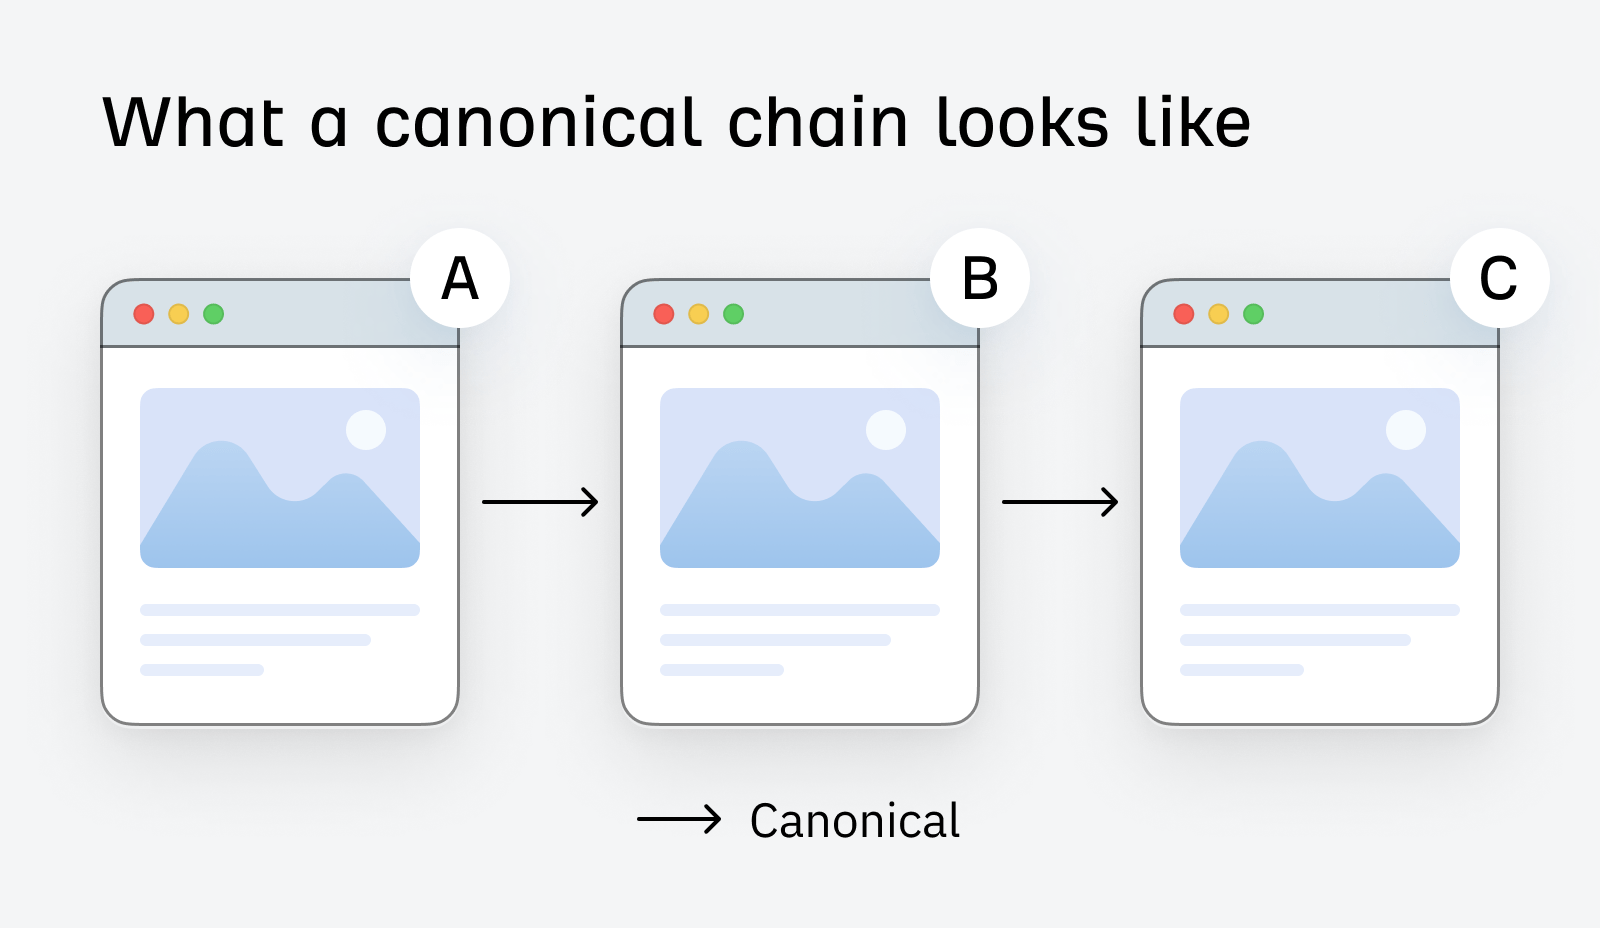 What does a canonical chain look like?